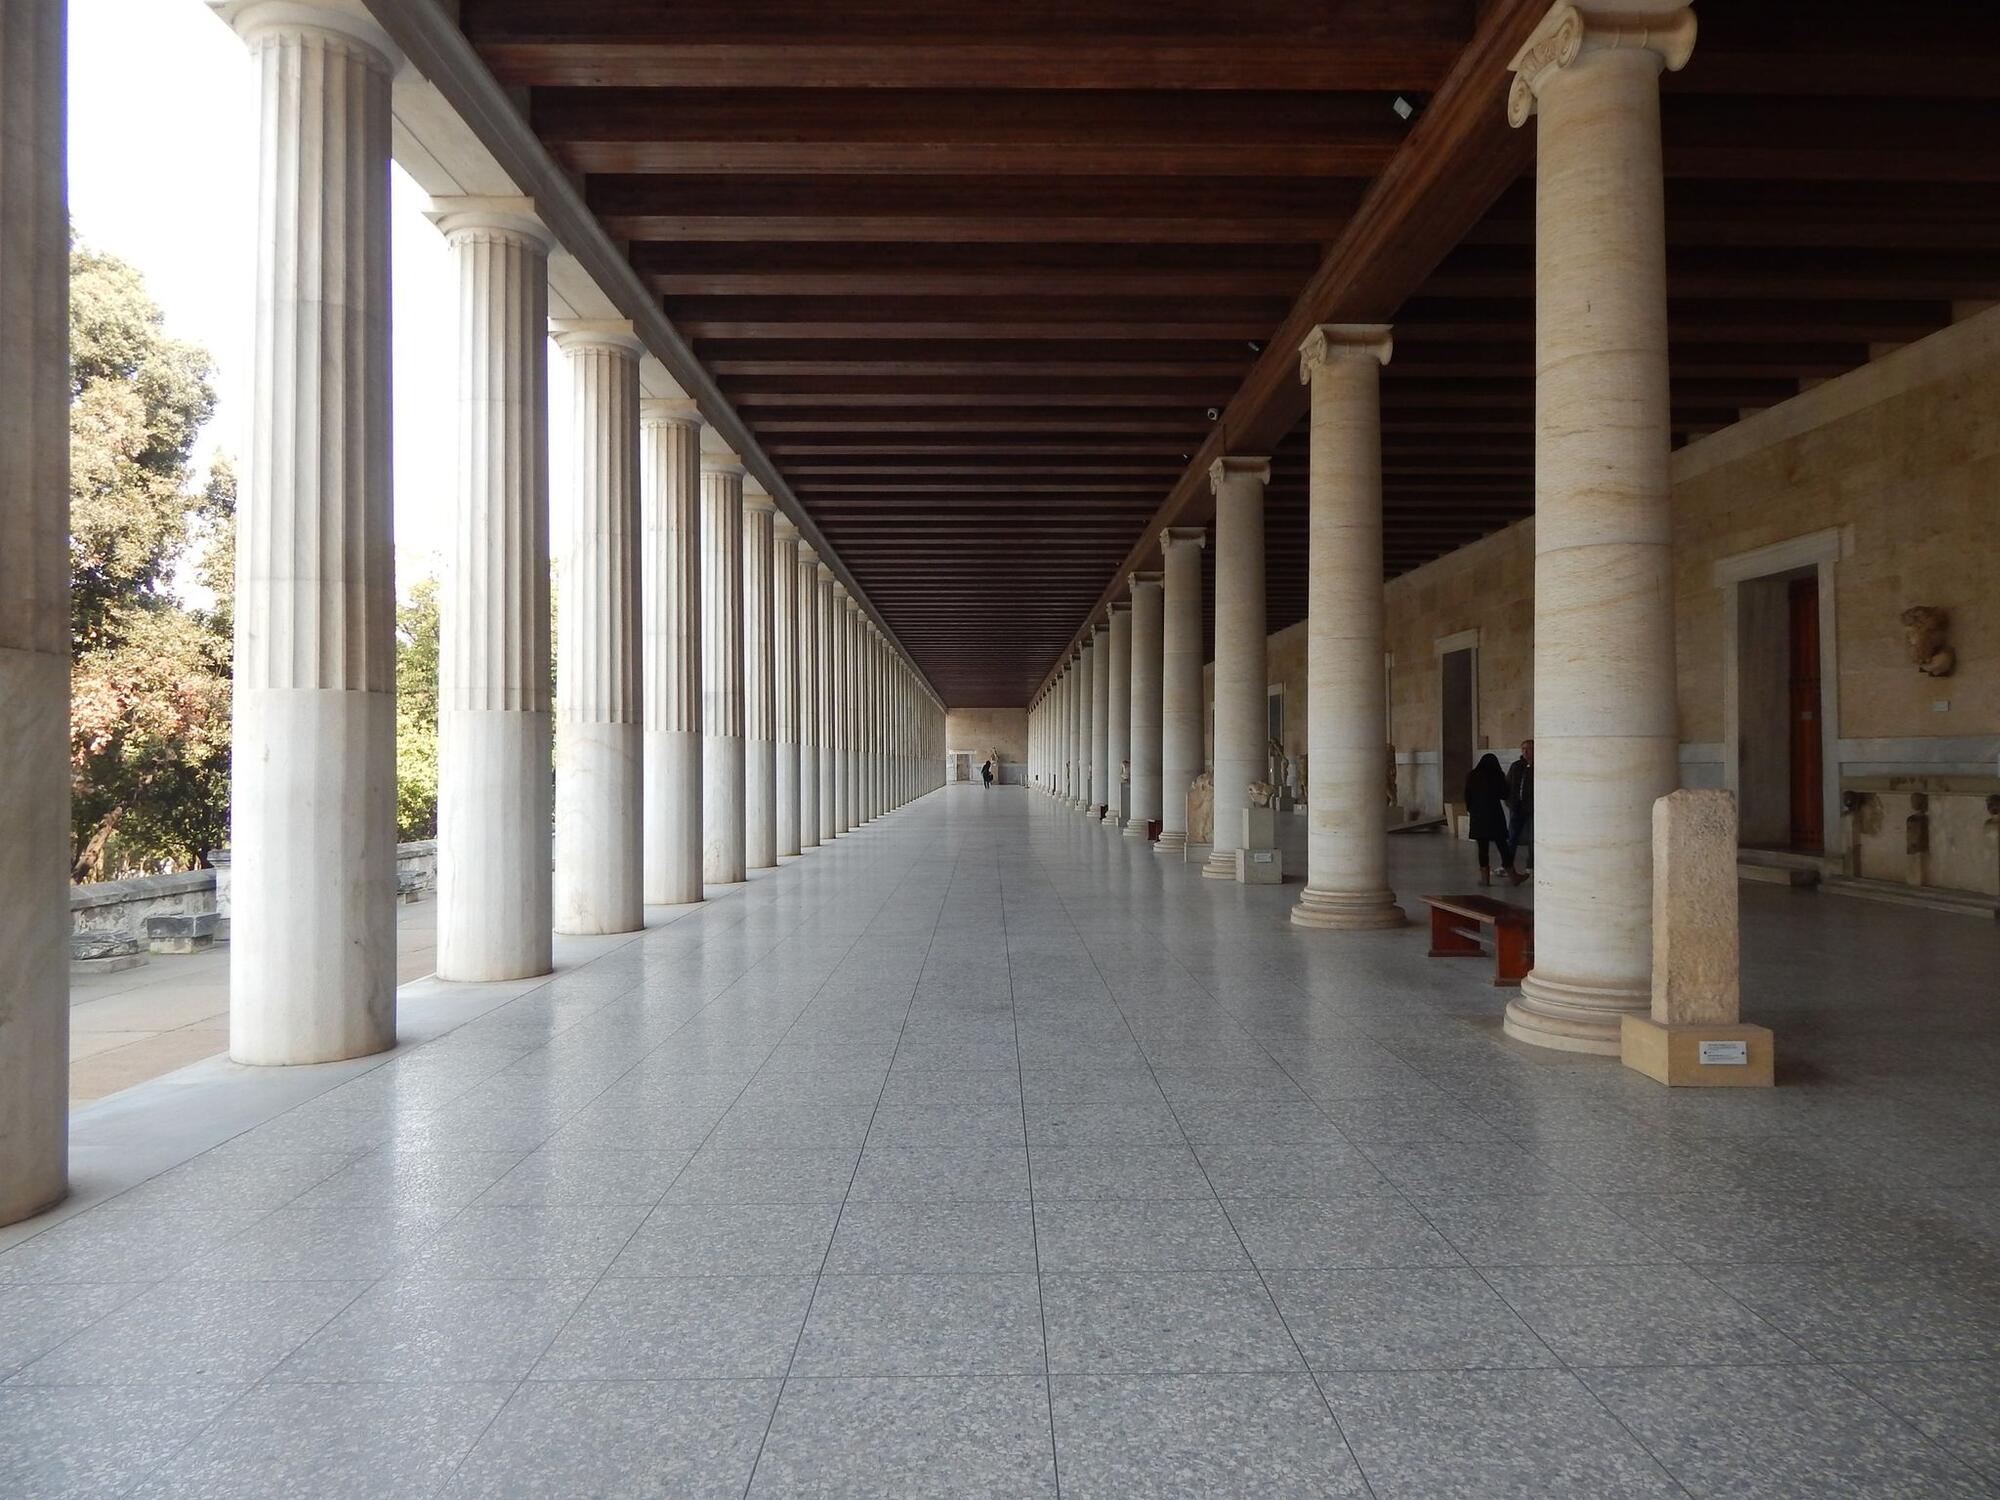 A wide corridor surrounded by ancient Greek style columns in Athens's Stoa of Attalos.